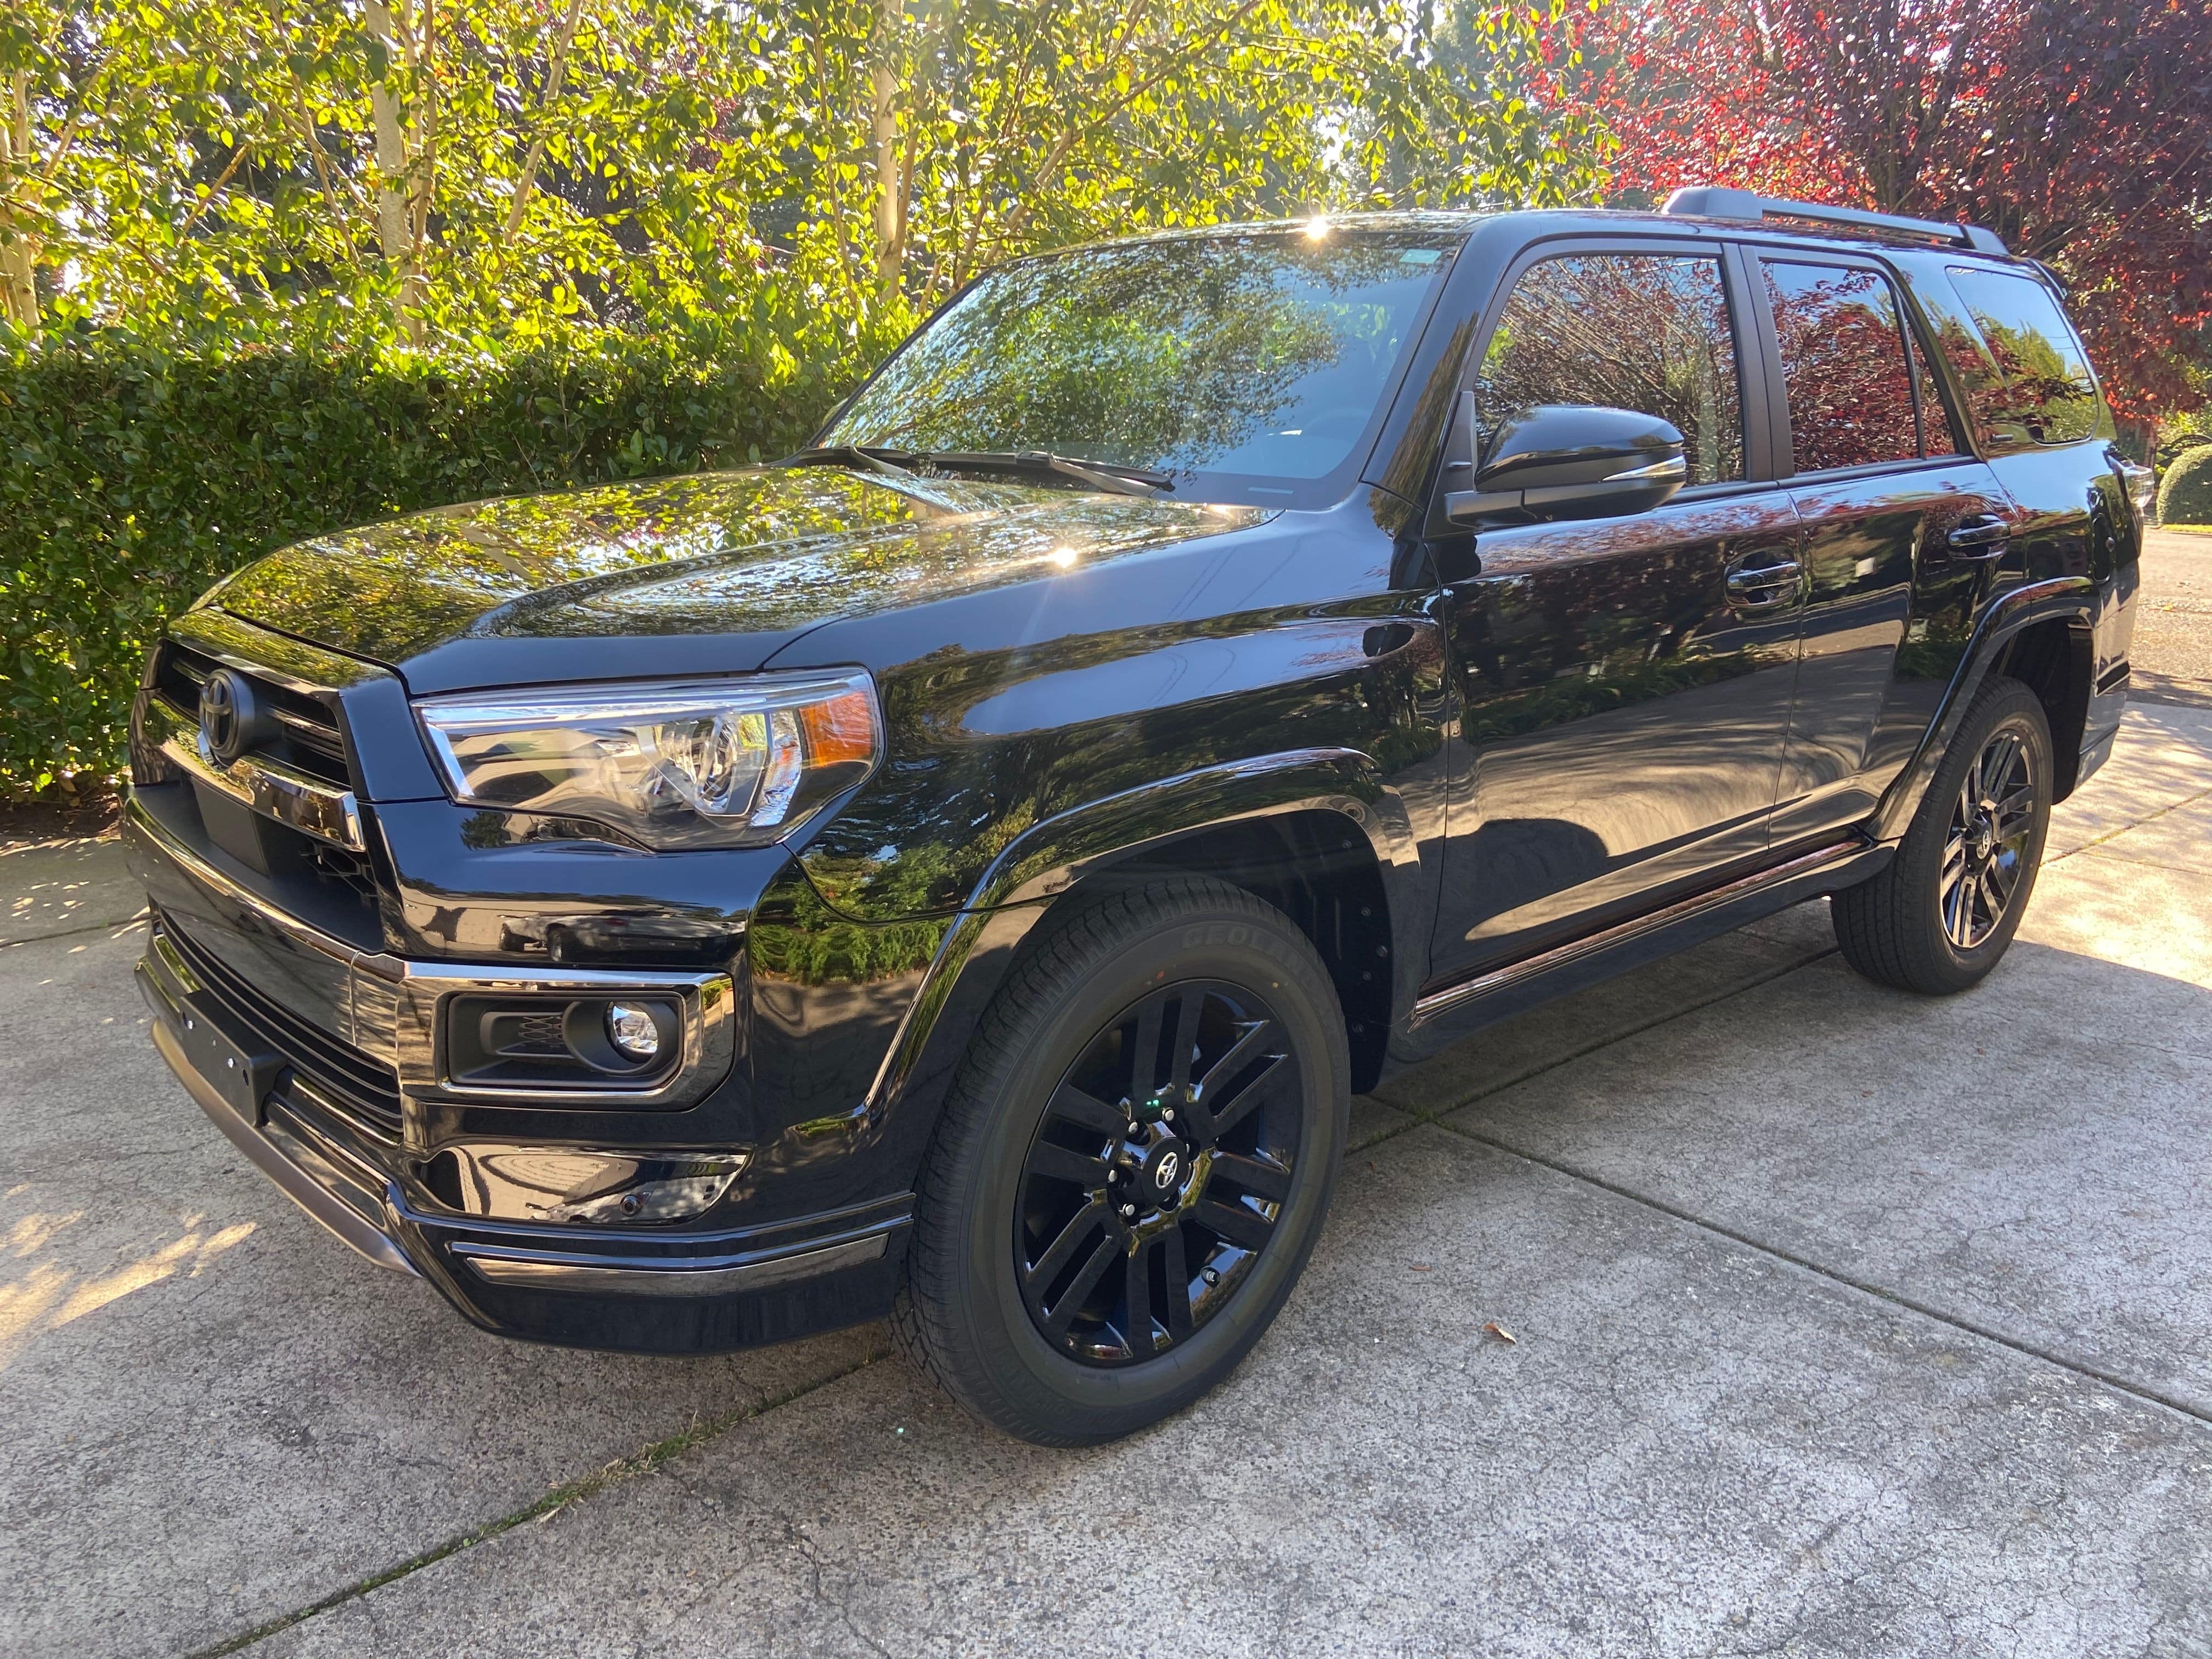 NEW 2021 TOYOTA 4RUNNER LIMITED 4X4